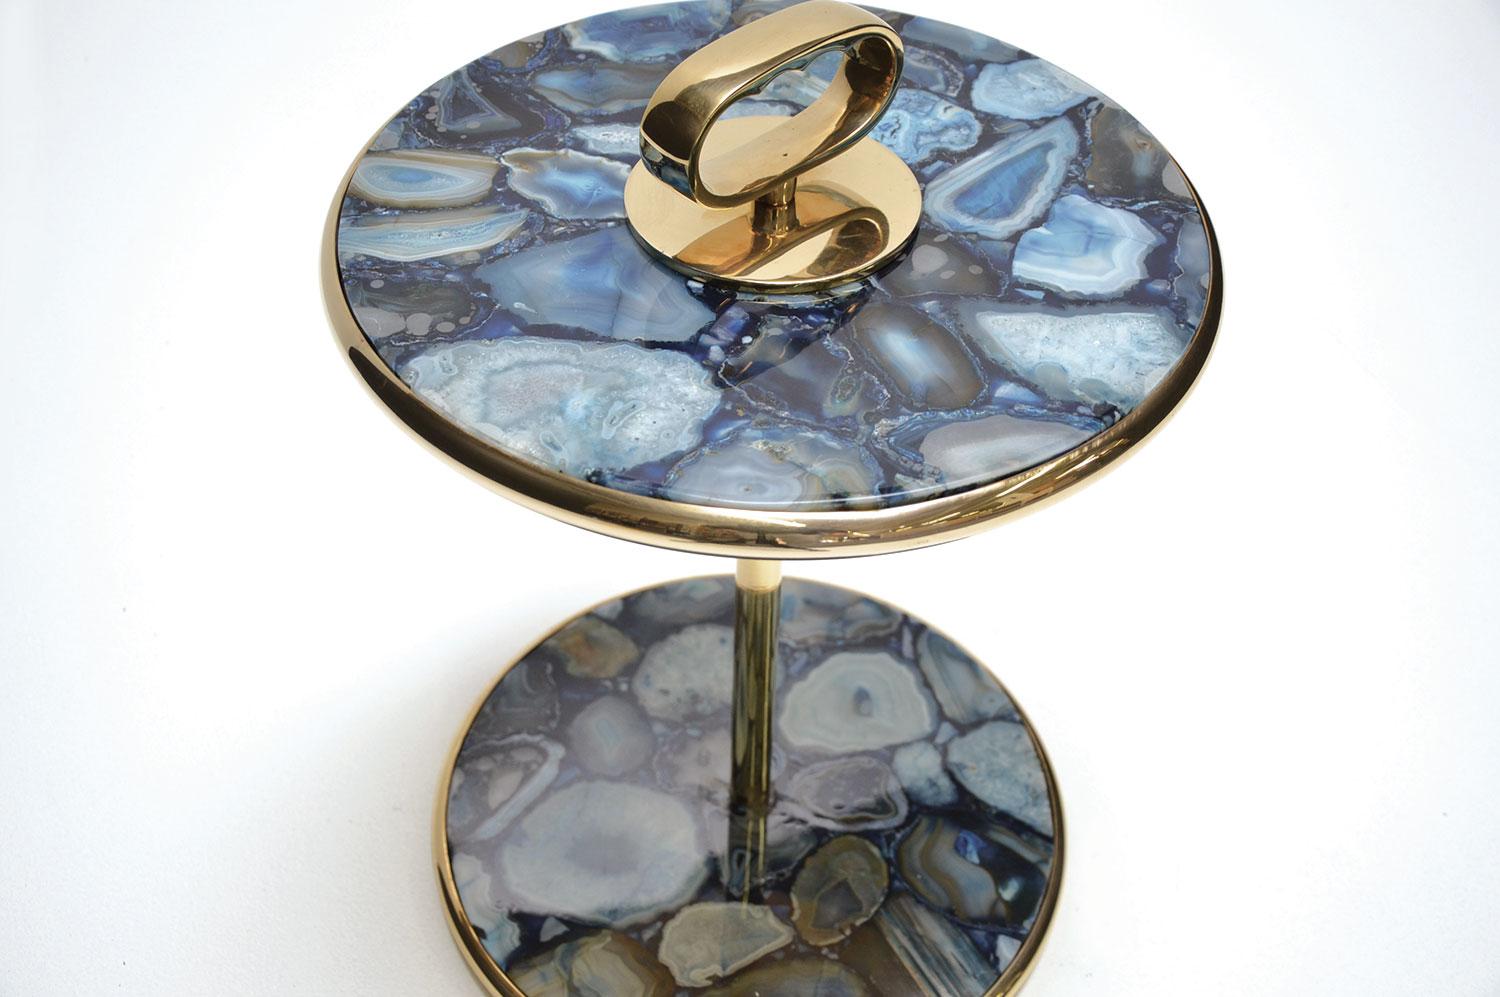 Cocktail side table constructed of polished brushed structure and blue agate stone plateau surfaces. The polished brass finish is uncoated. It can be coated to prevent natural tarnish and aging upon request.